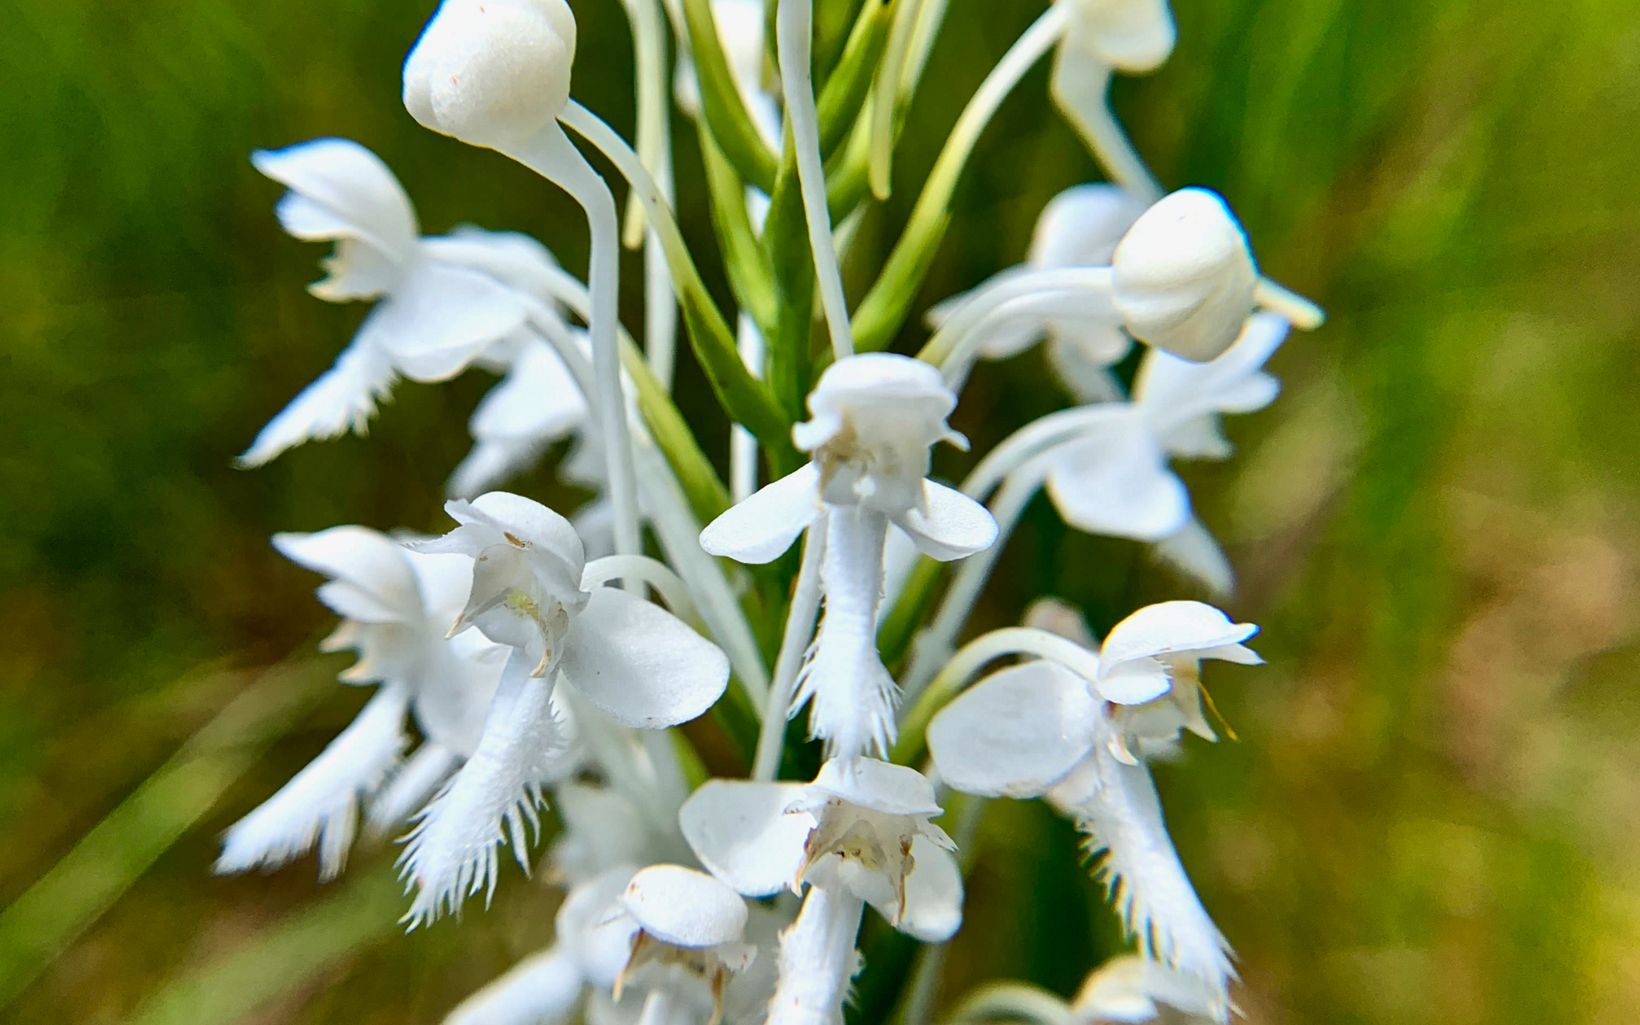 Platanthera blephariglottis is distinguished by its bright white color and long tongue protruding from the bottom of the flower.